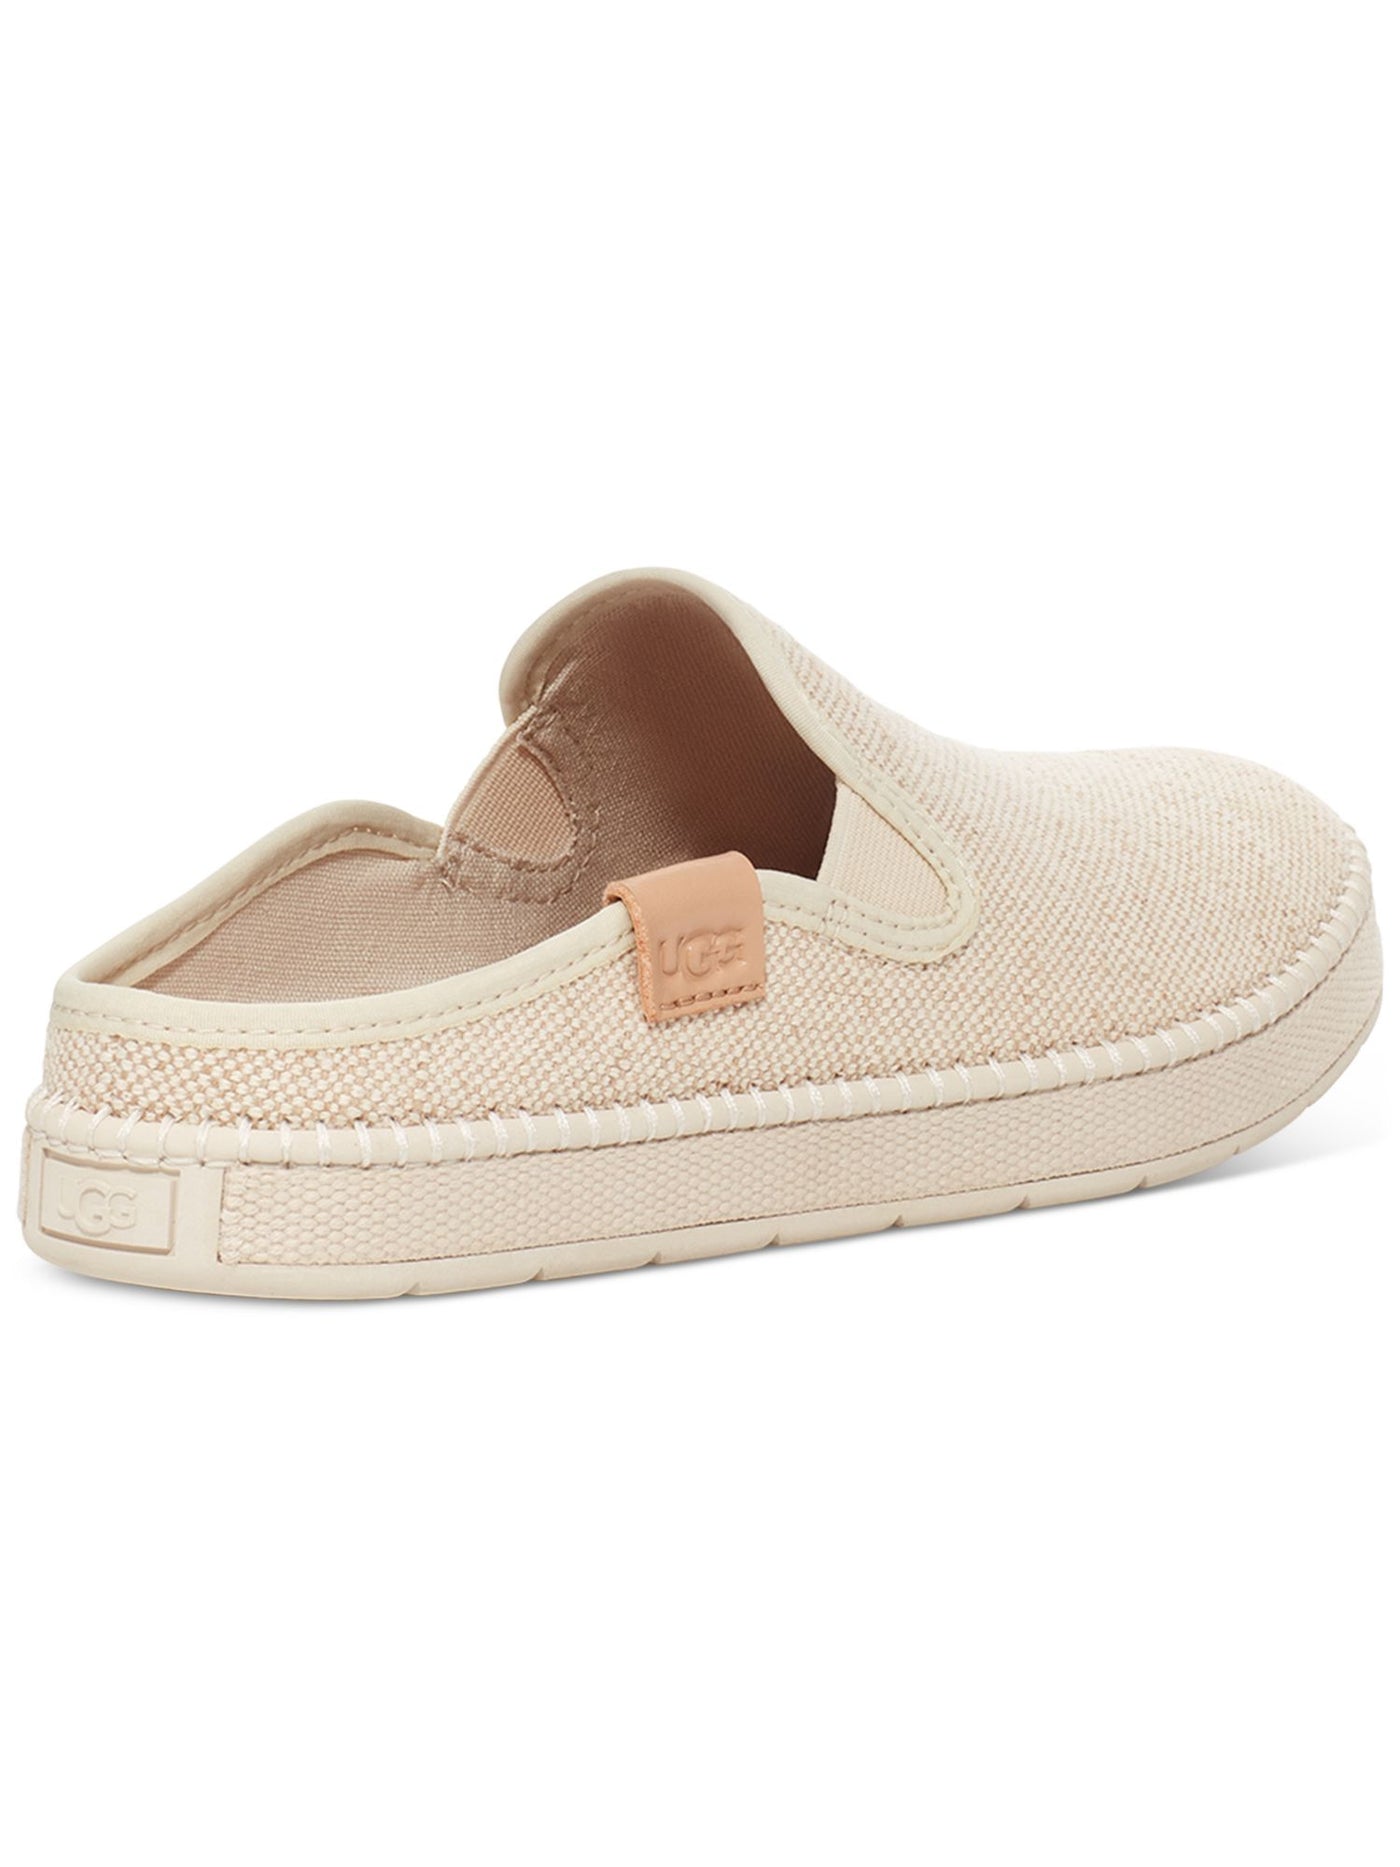 UGG Womens Beige Woven Goring Removable Insole Cushioned Delu Round Toe Platform Slip On Mules 9